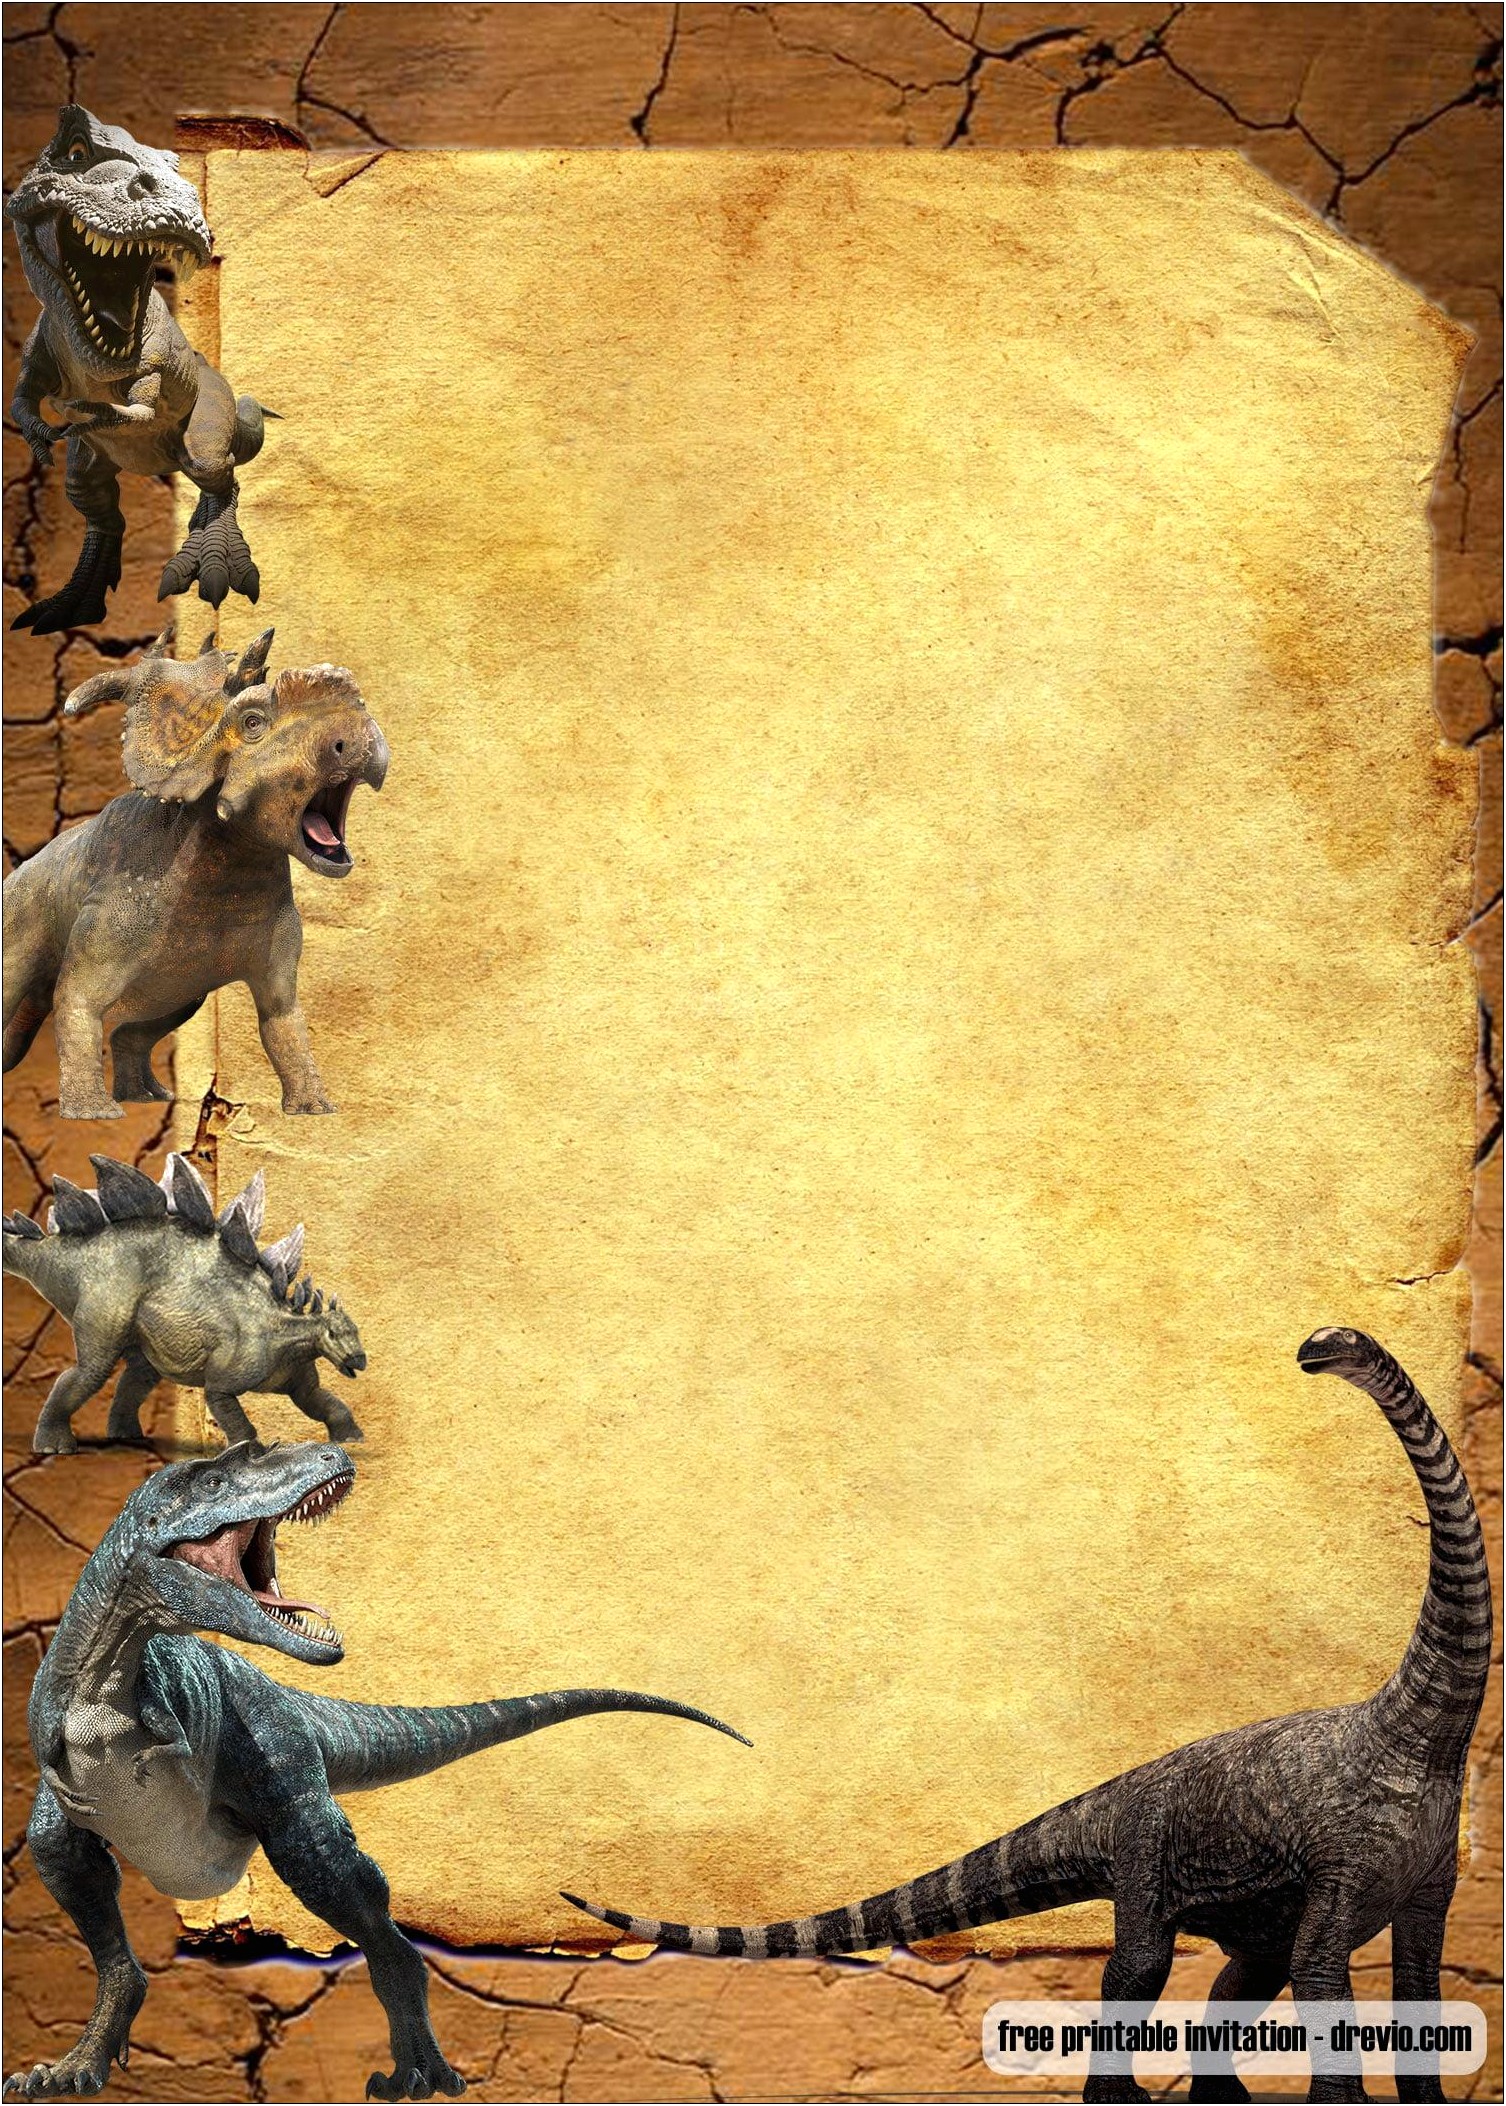 Free Pin The Tail On The Dinosaur Template